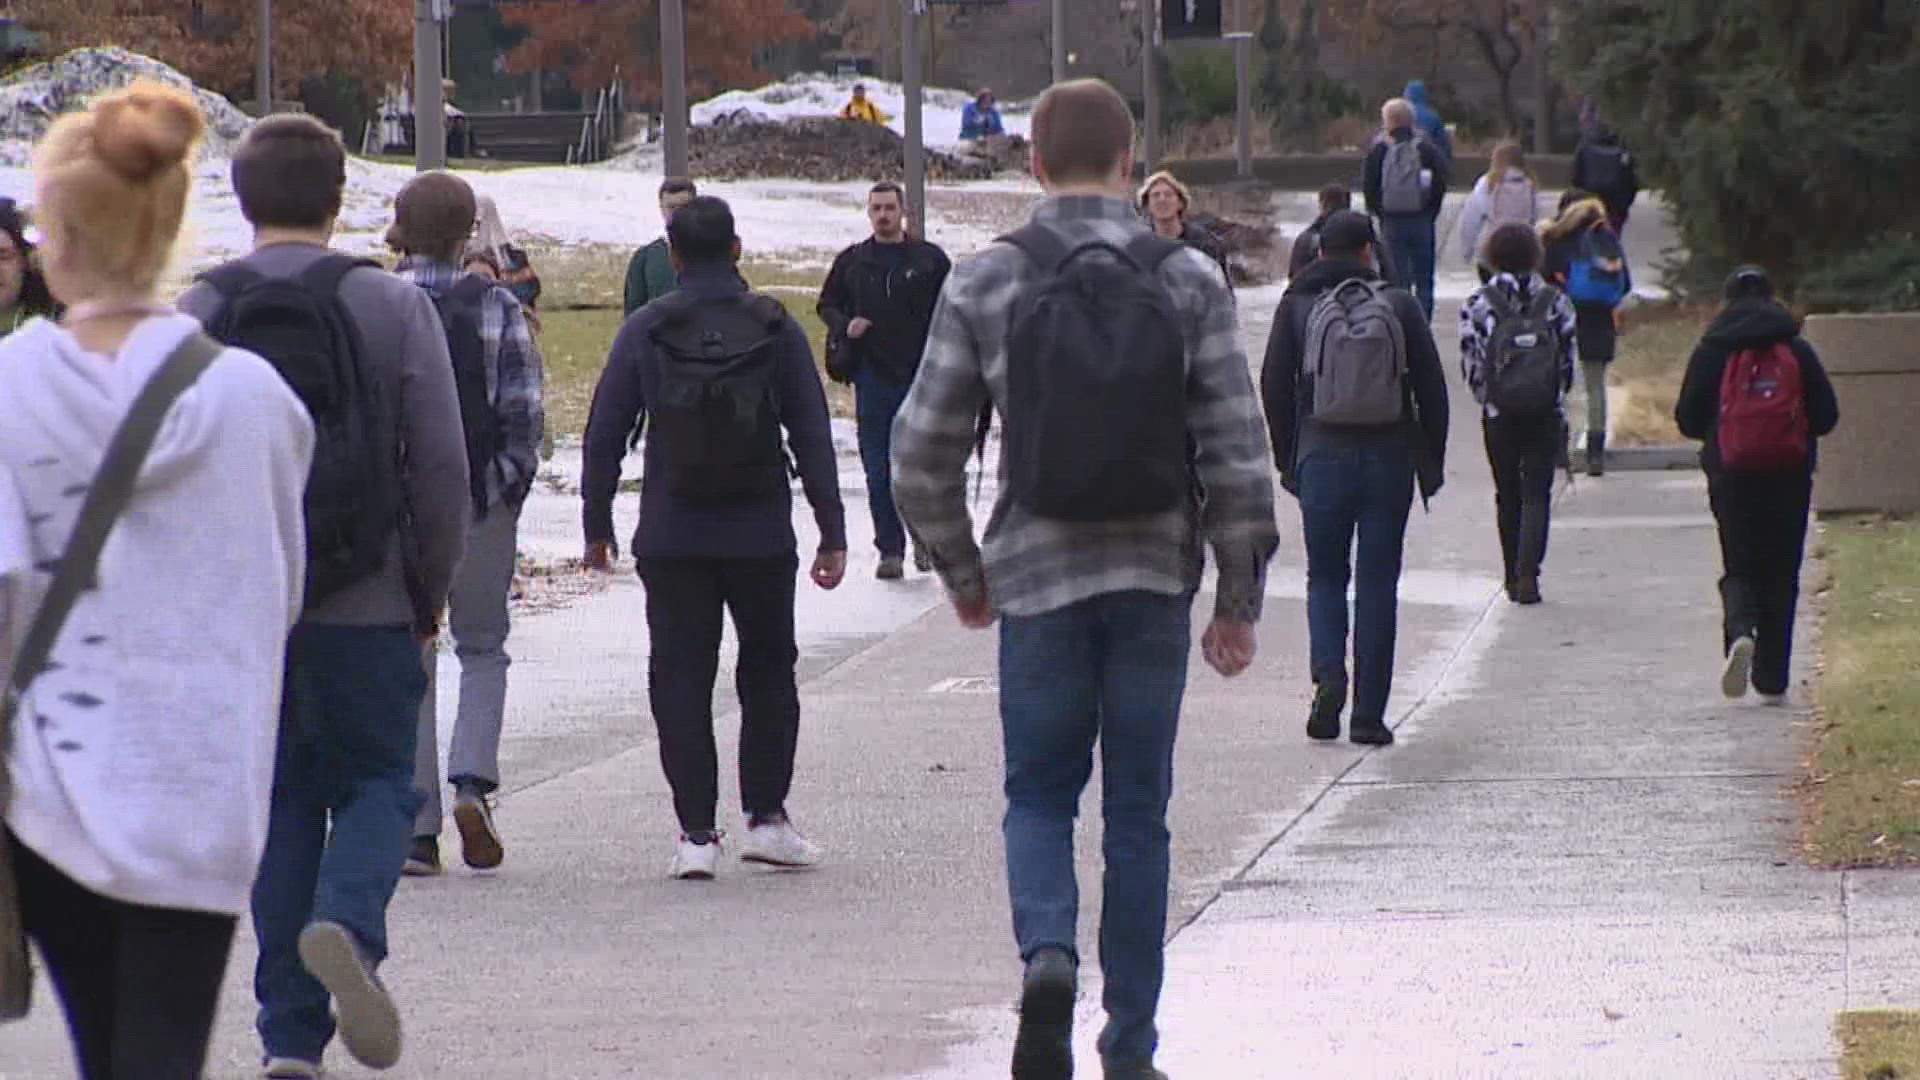 The University of Idaho says it will continue to offer counseling and security on campus as students mourn the loss of four classmates.